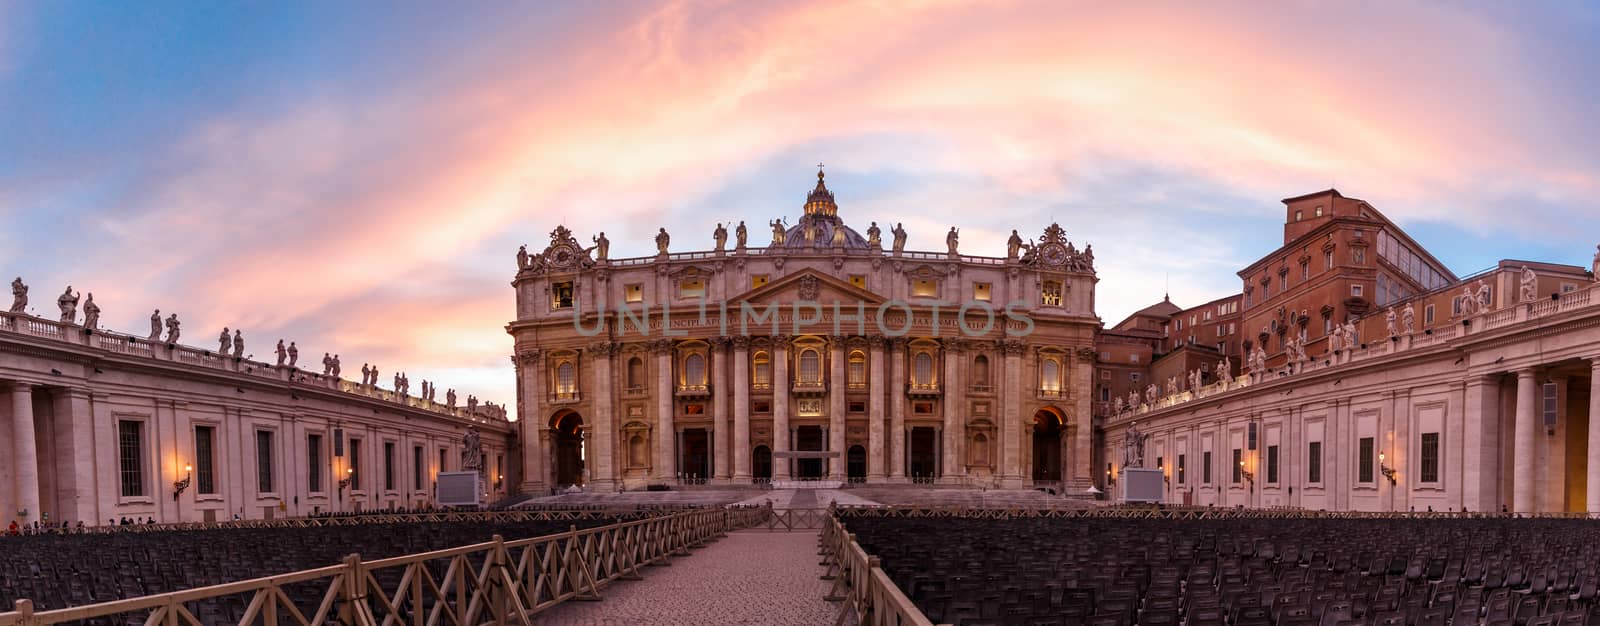 Front view of St Peter's Basilica in Vatican with people around, on cloudy blue sky backgroundat sunset time.